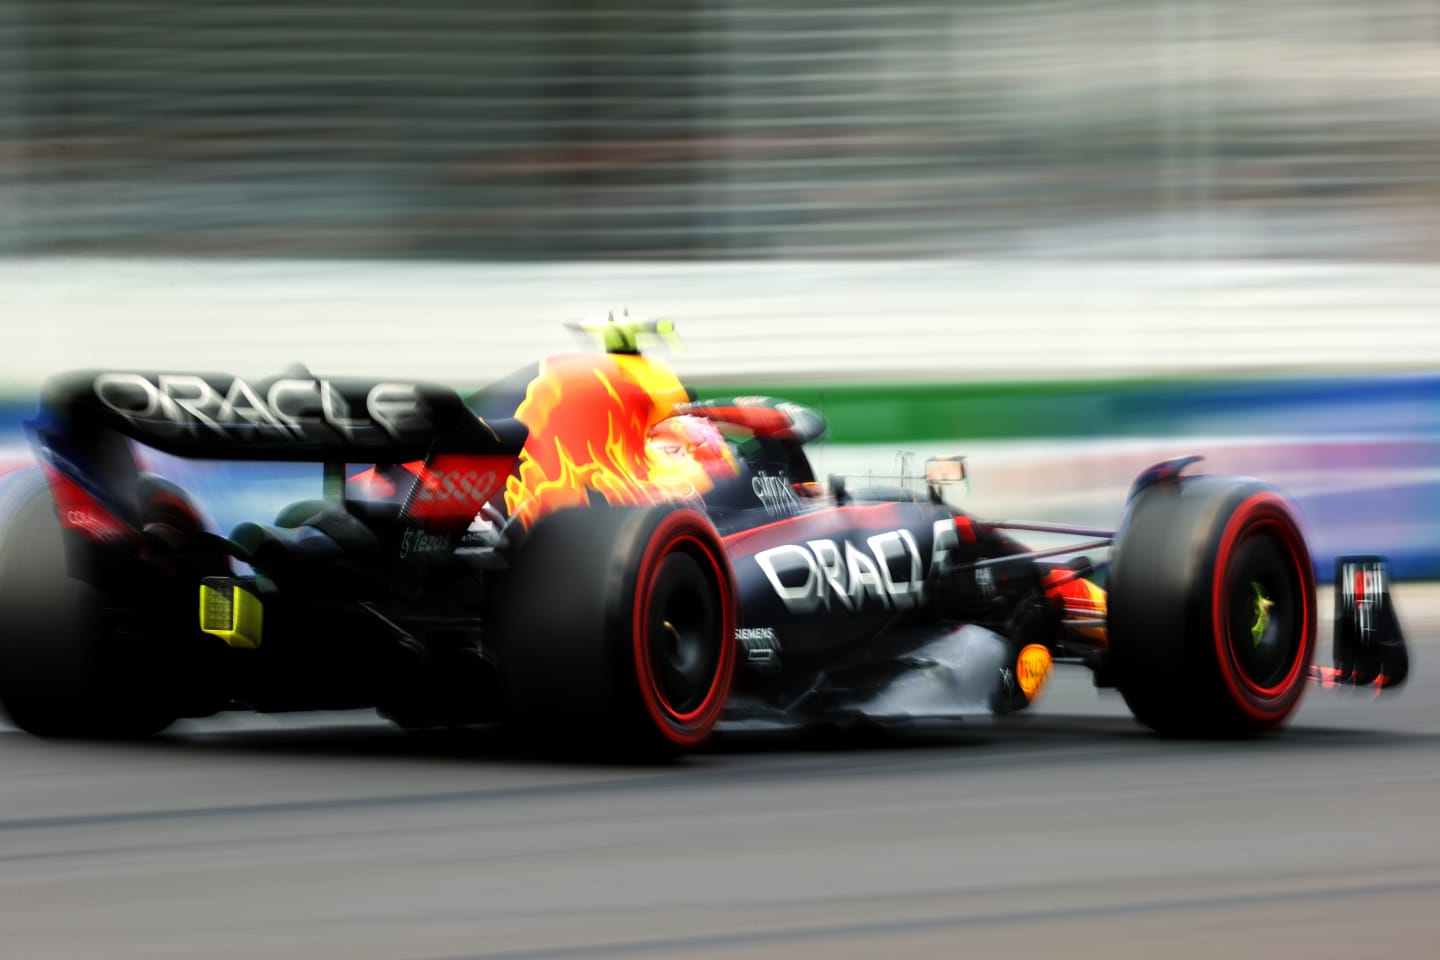 MELBOURNE, AUSTRALIA - APRIL 08: Sergio Perez of Mexico driving the (11) Oracle Red Bull Racing RB18 on track during practice ahead of the F1 Grand Prix of Australia at Melbourne Grand Prix Circuit on April 08, 2022 in Melbourne, Australia. (Photo by Robert Cianflone/Getty Images)